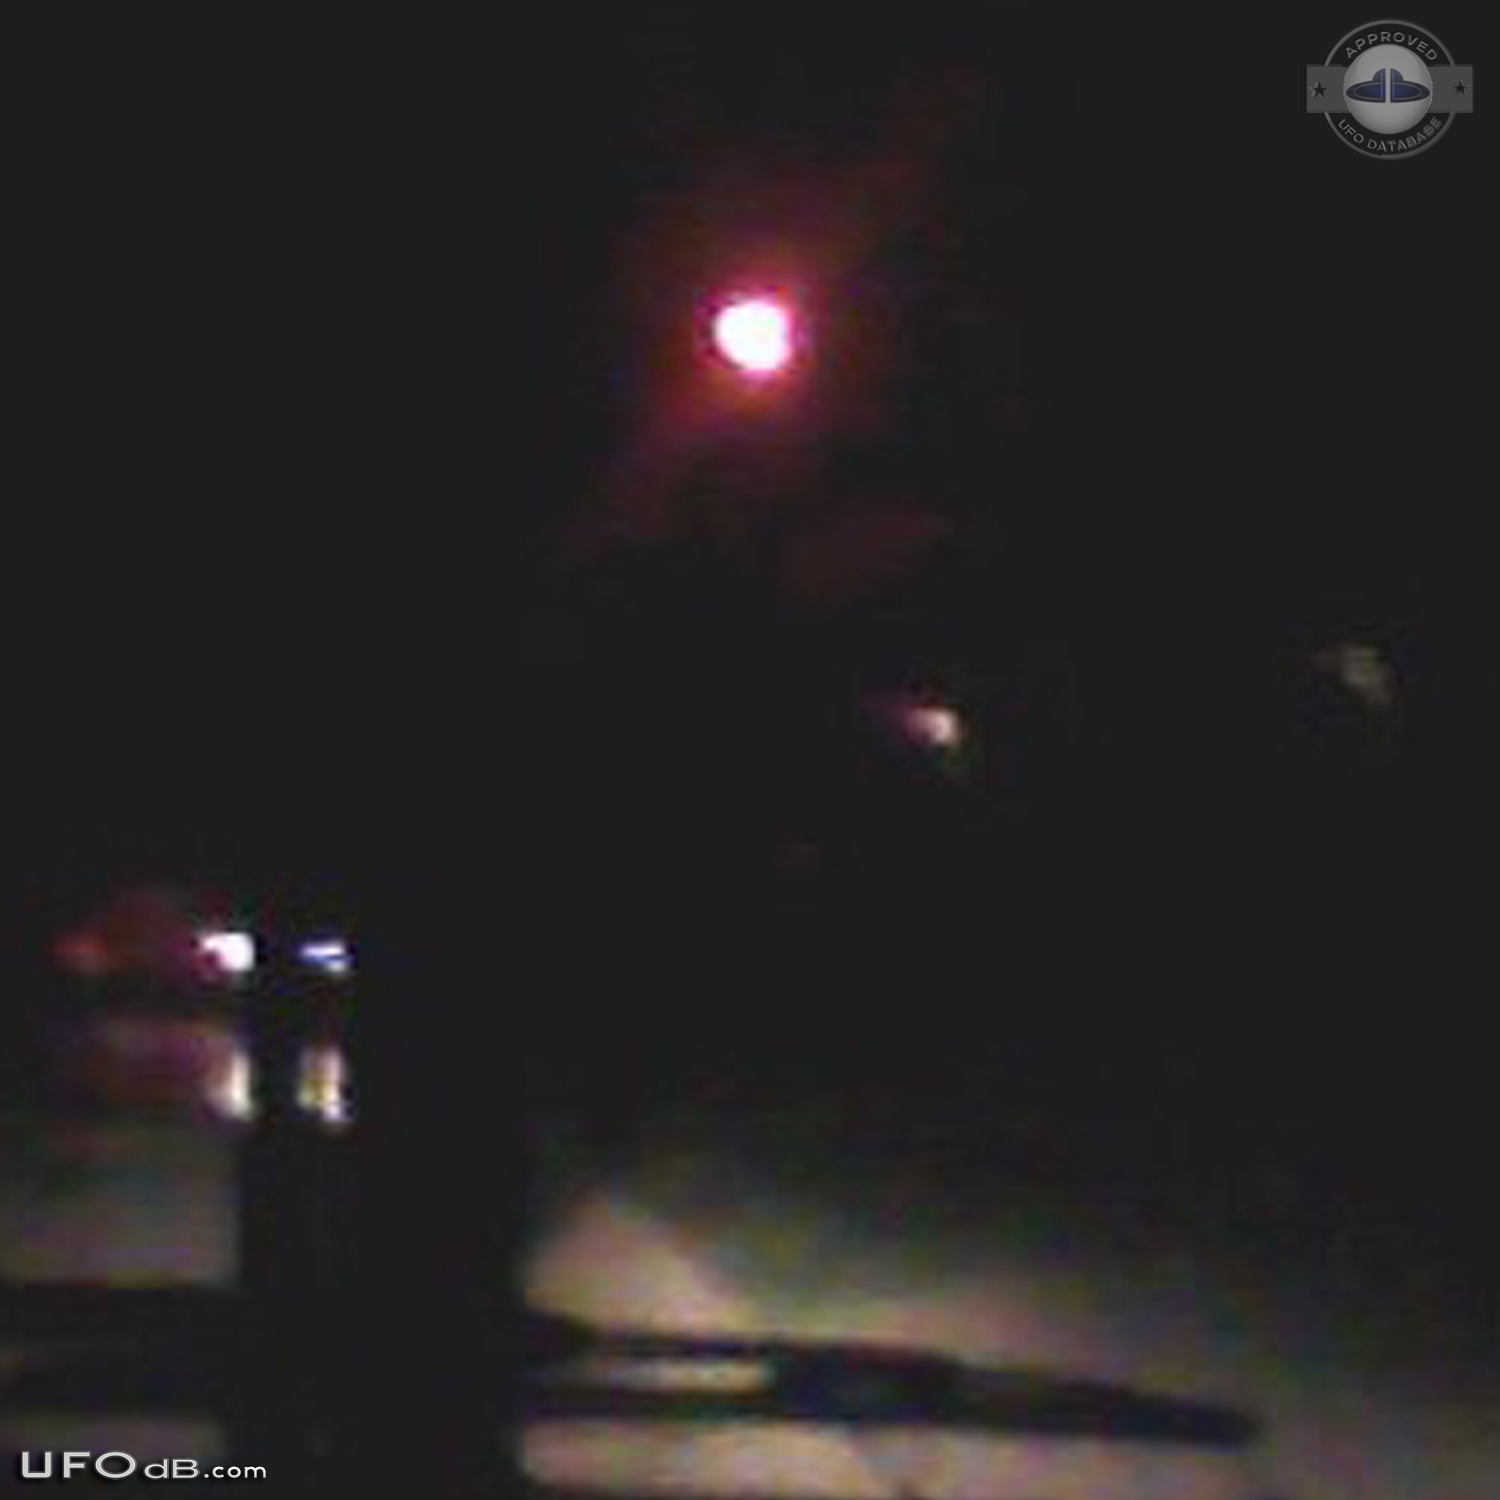 Bright glowing hovering sphere UFO over St Louis Missouri - 2014 UFO Picture #560-3